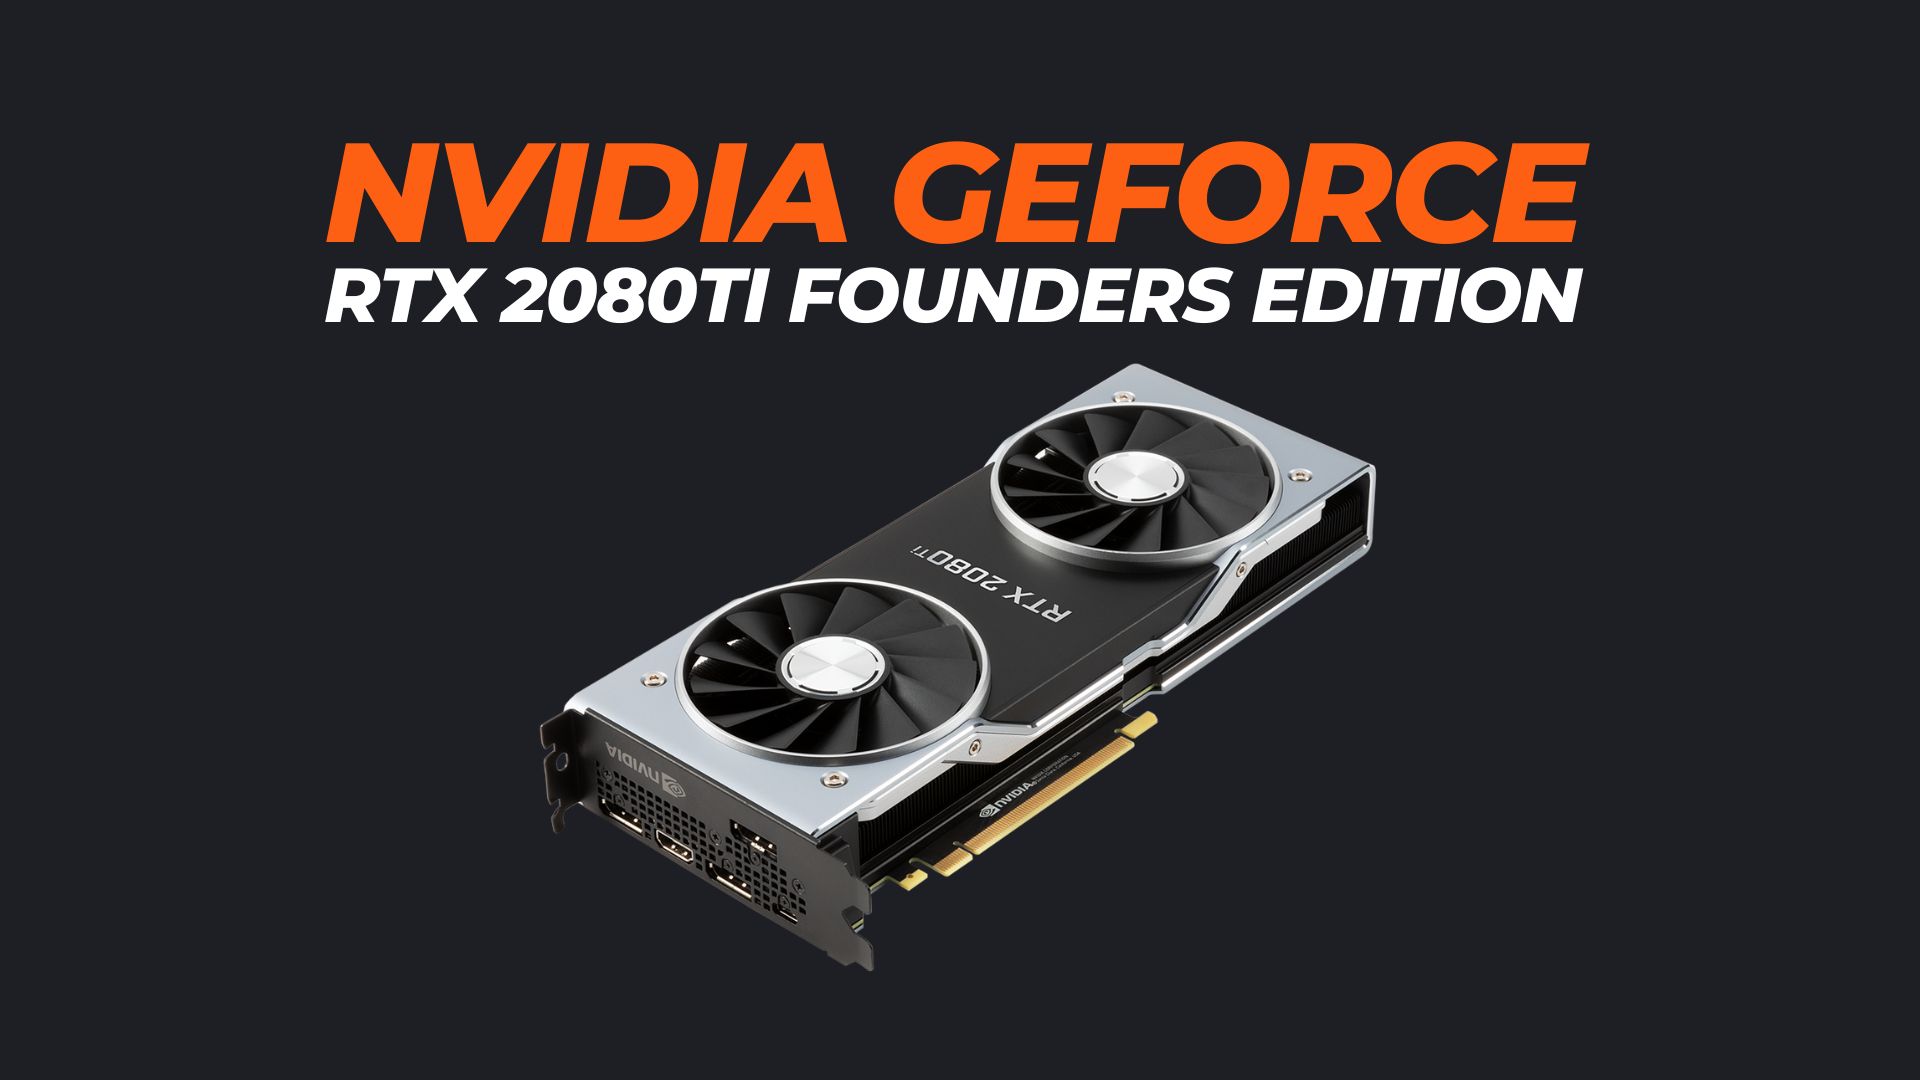 RTX 2080Ti Founders Edition